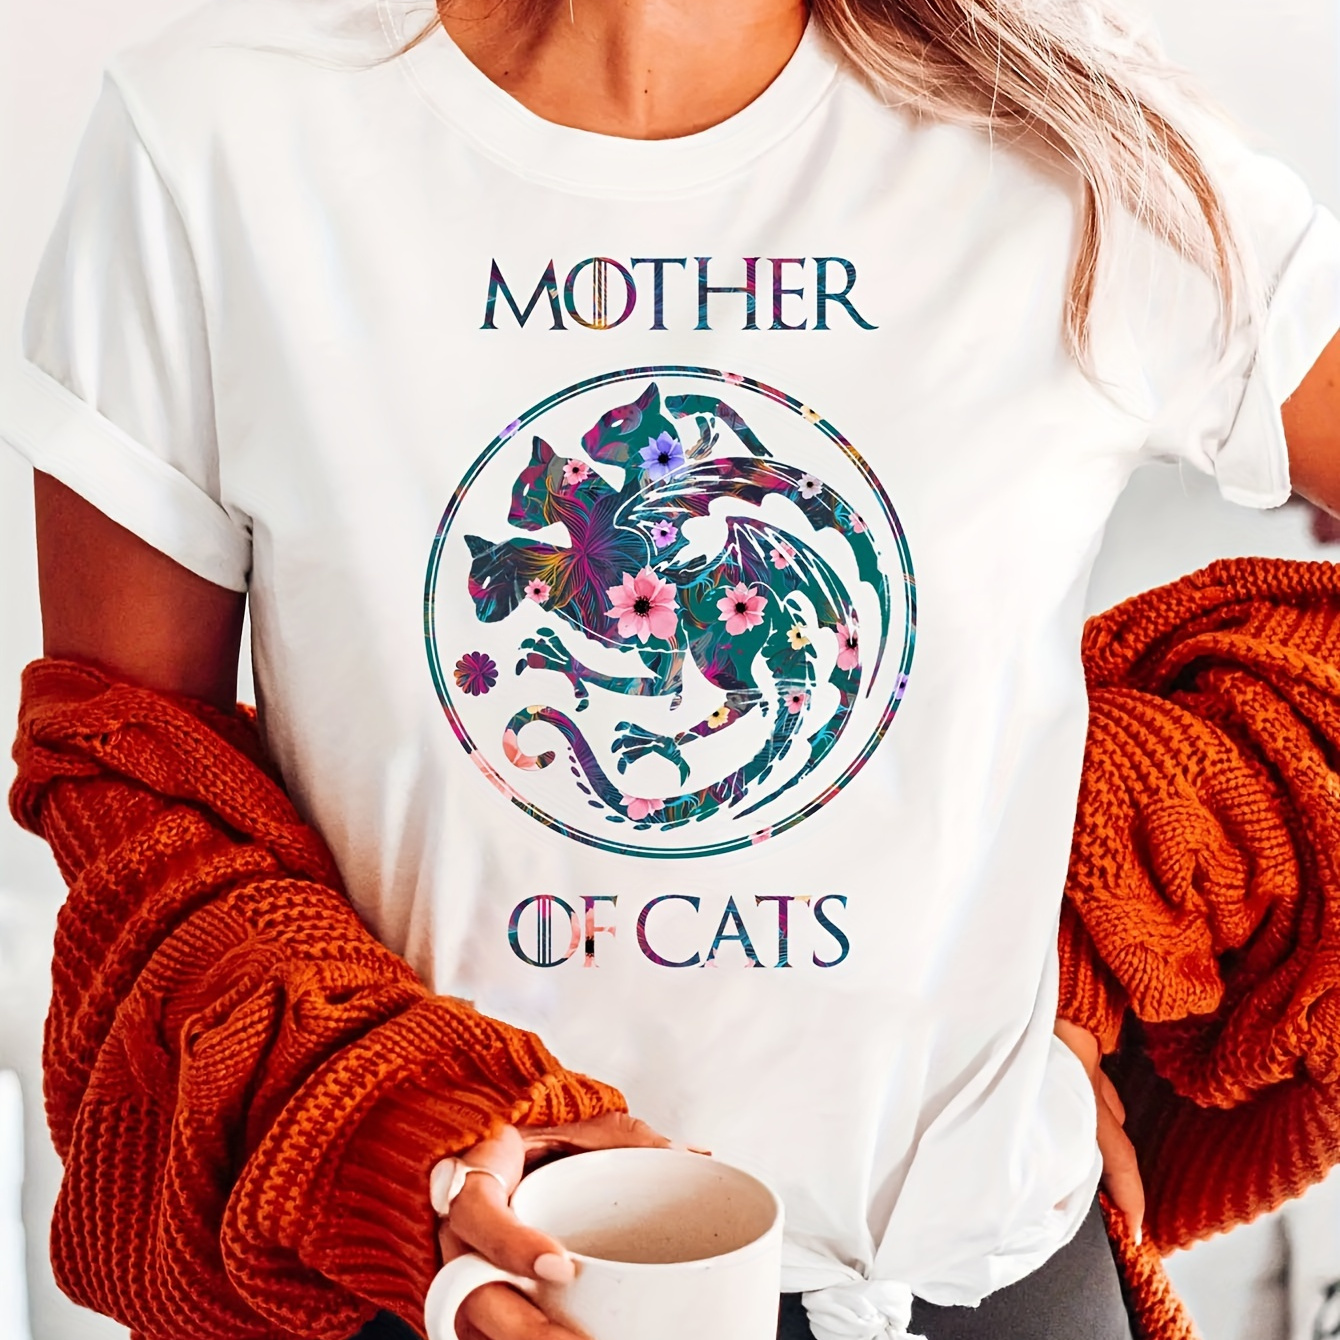 

Mother Of Cats Print Crew Neck T-shirt, Short Sleeve Casual Top For Summer & Spring, Women's Clothing